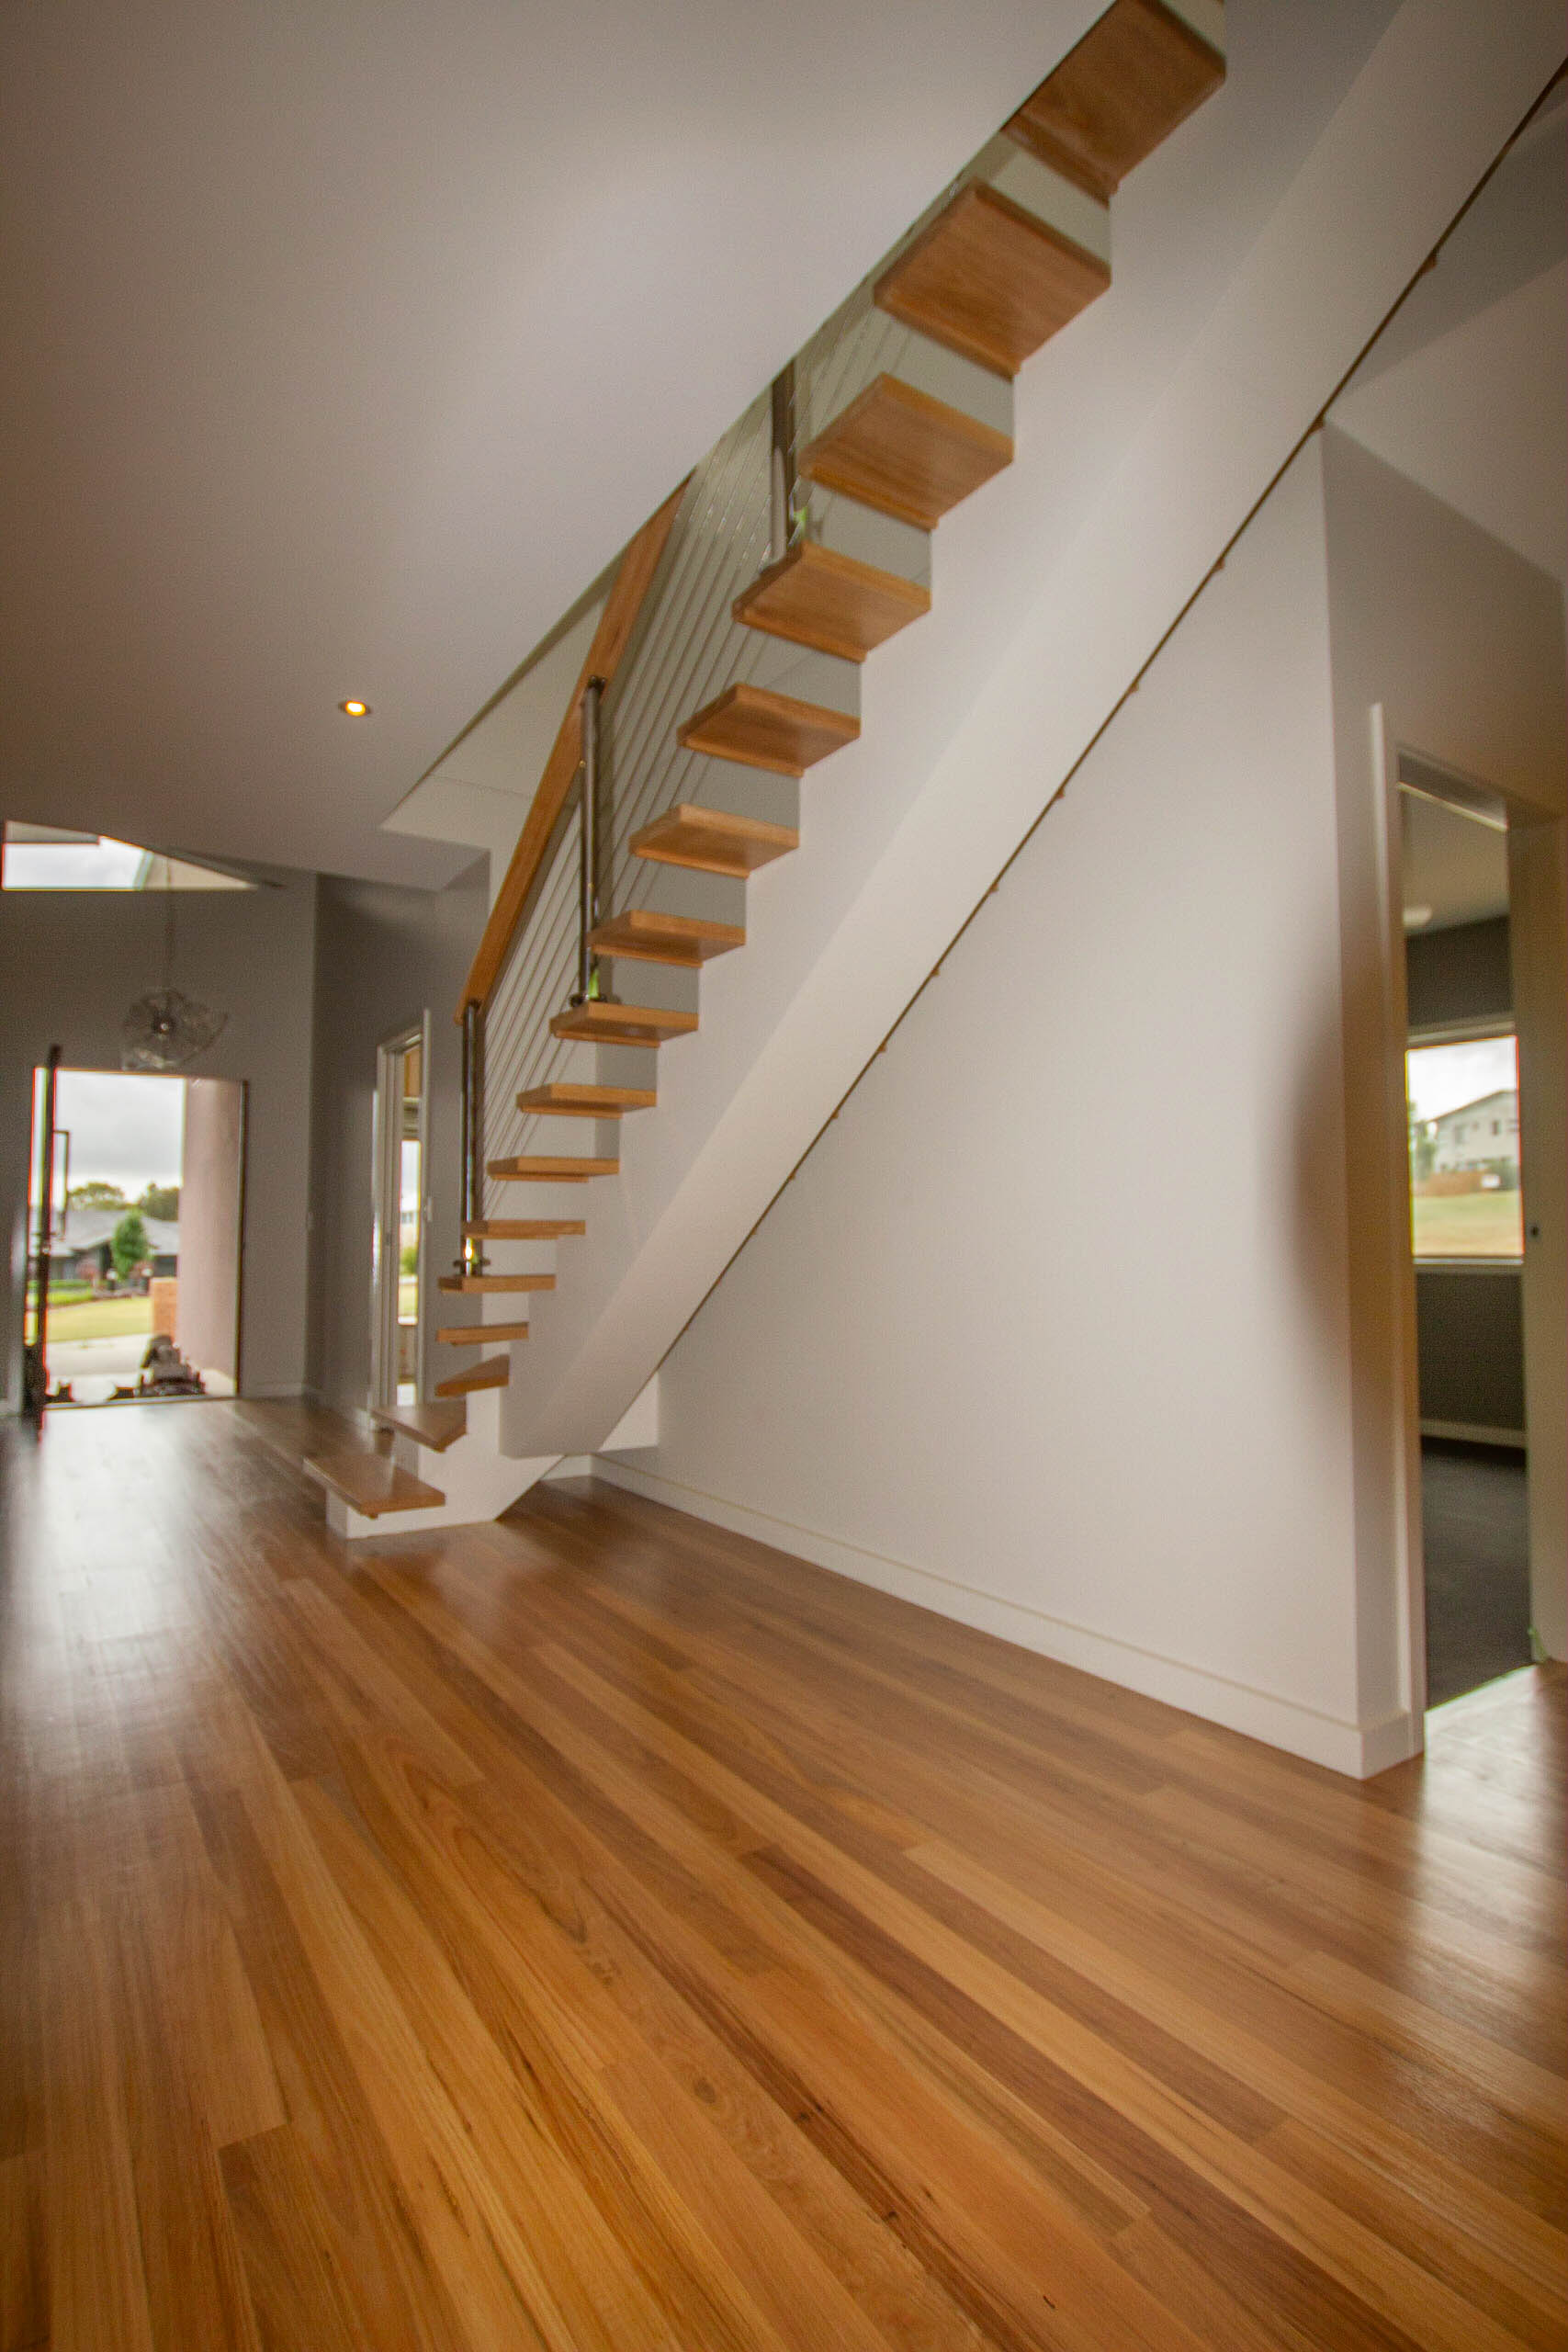 Timber stair treads with anti slip finish